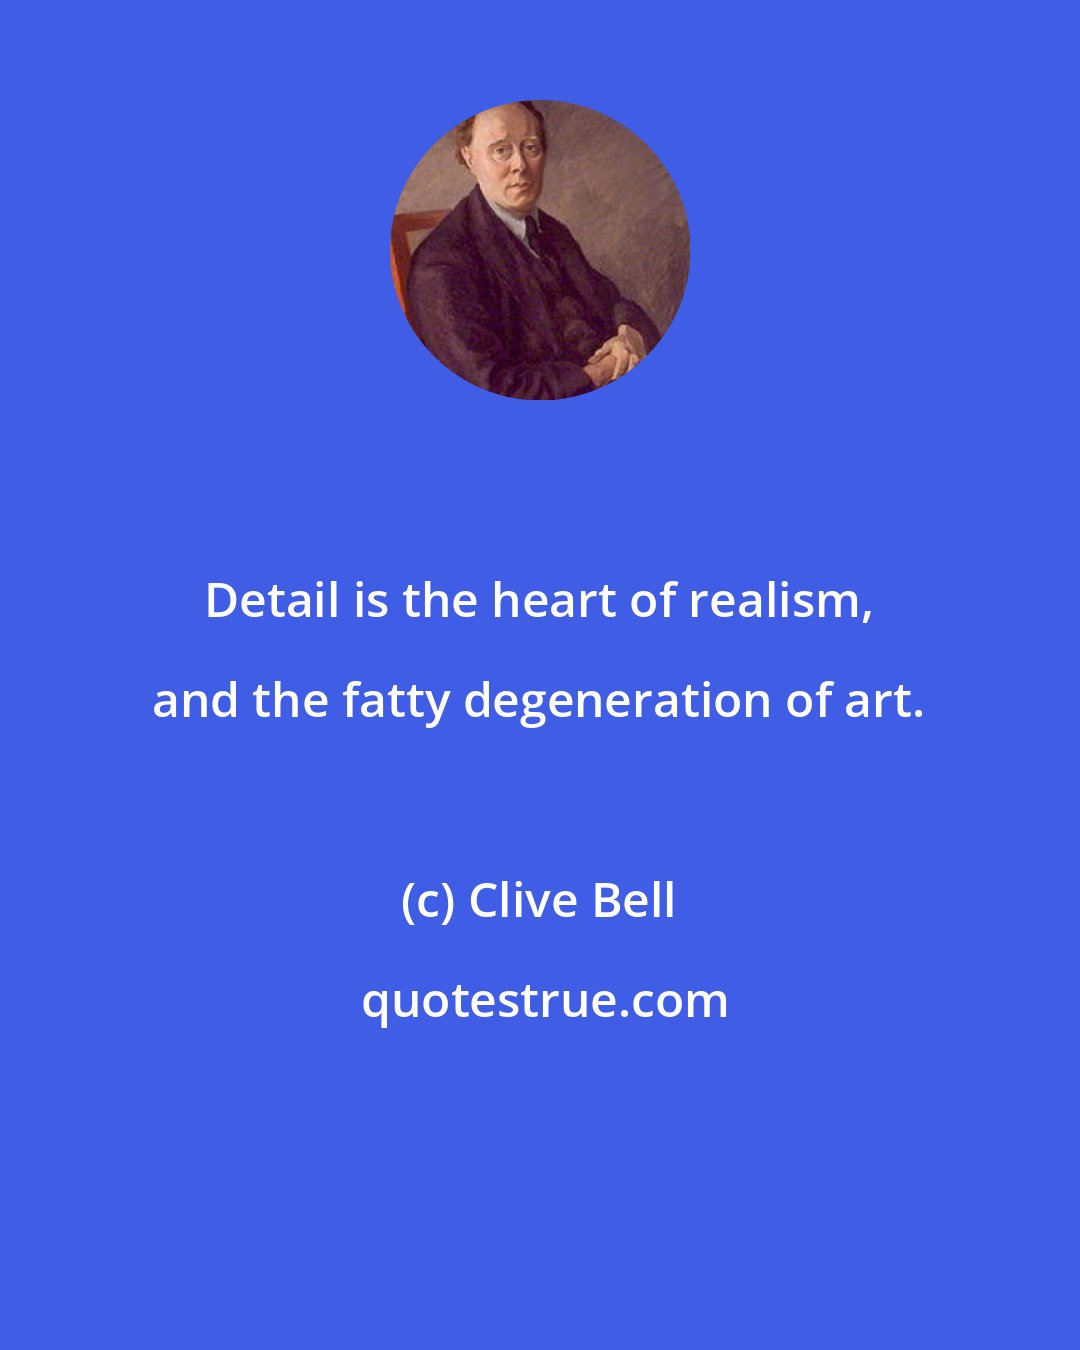 Clive Bell: Detail is the heart of realism, and the fatty degeneration of art.